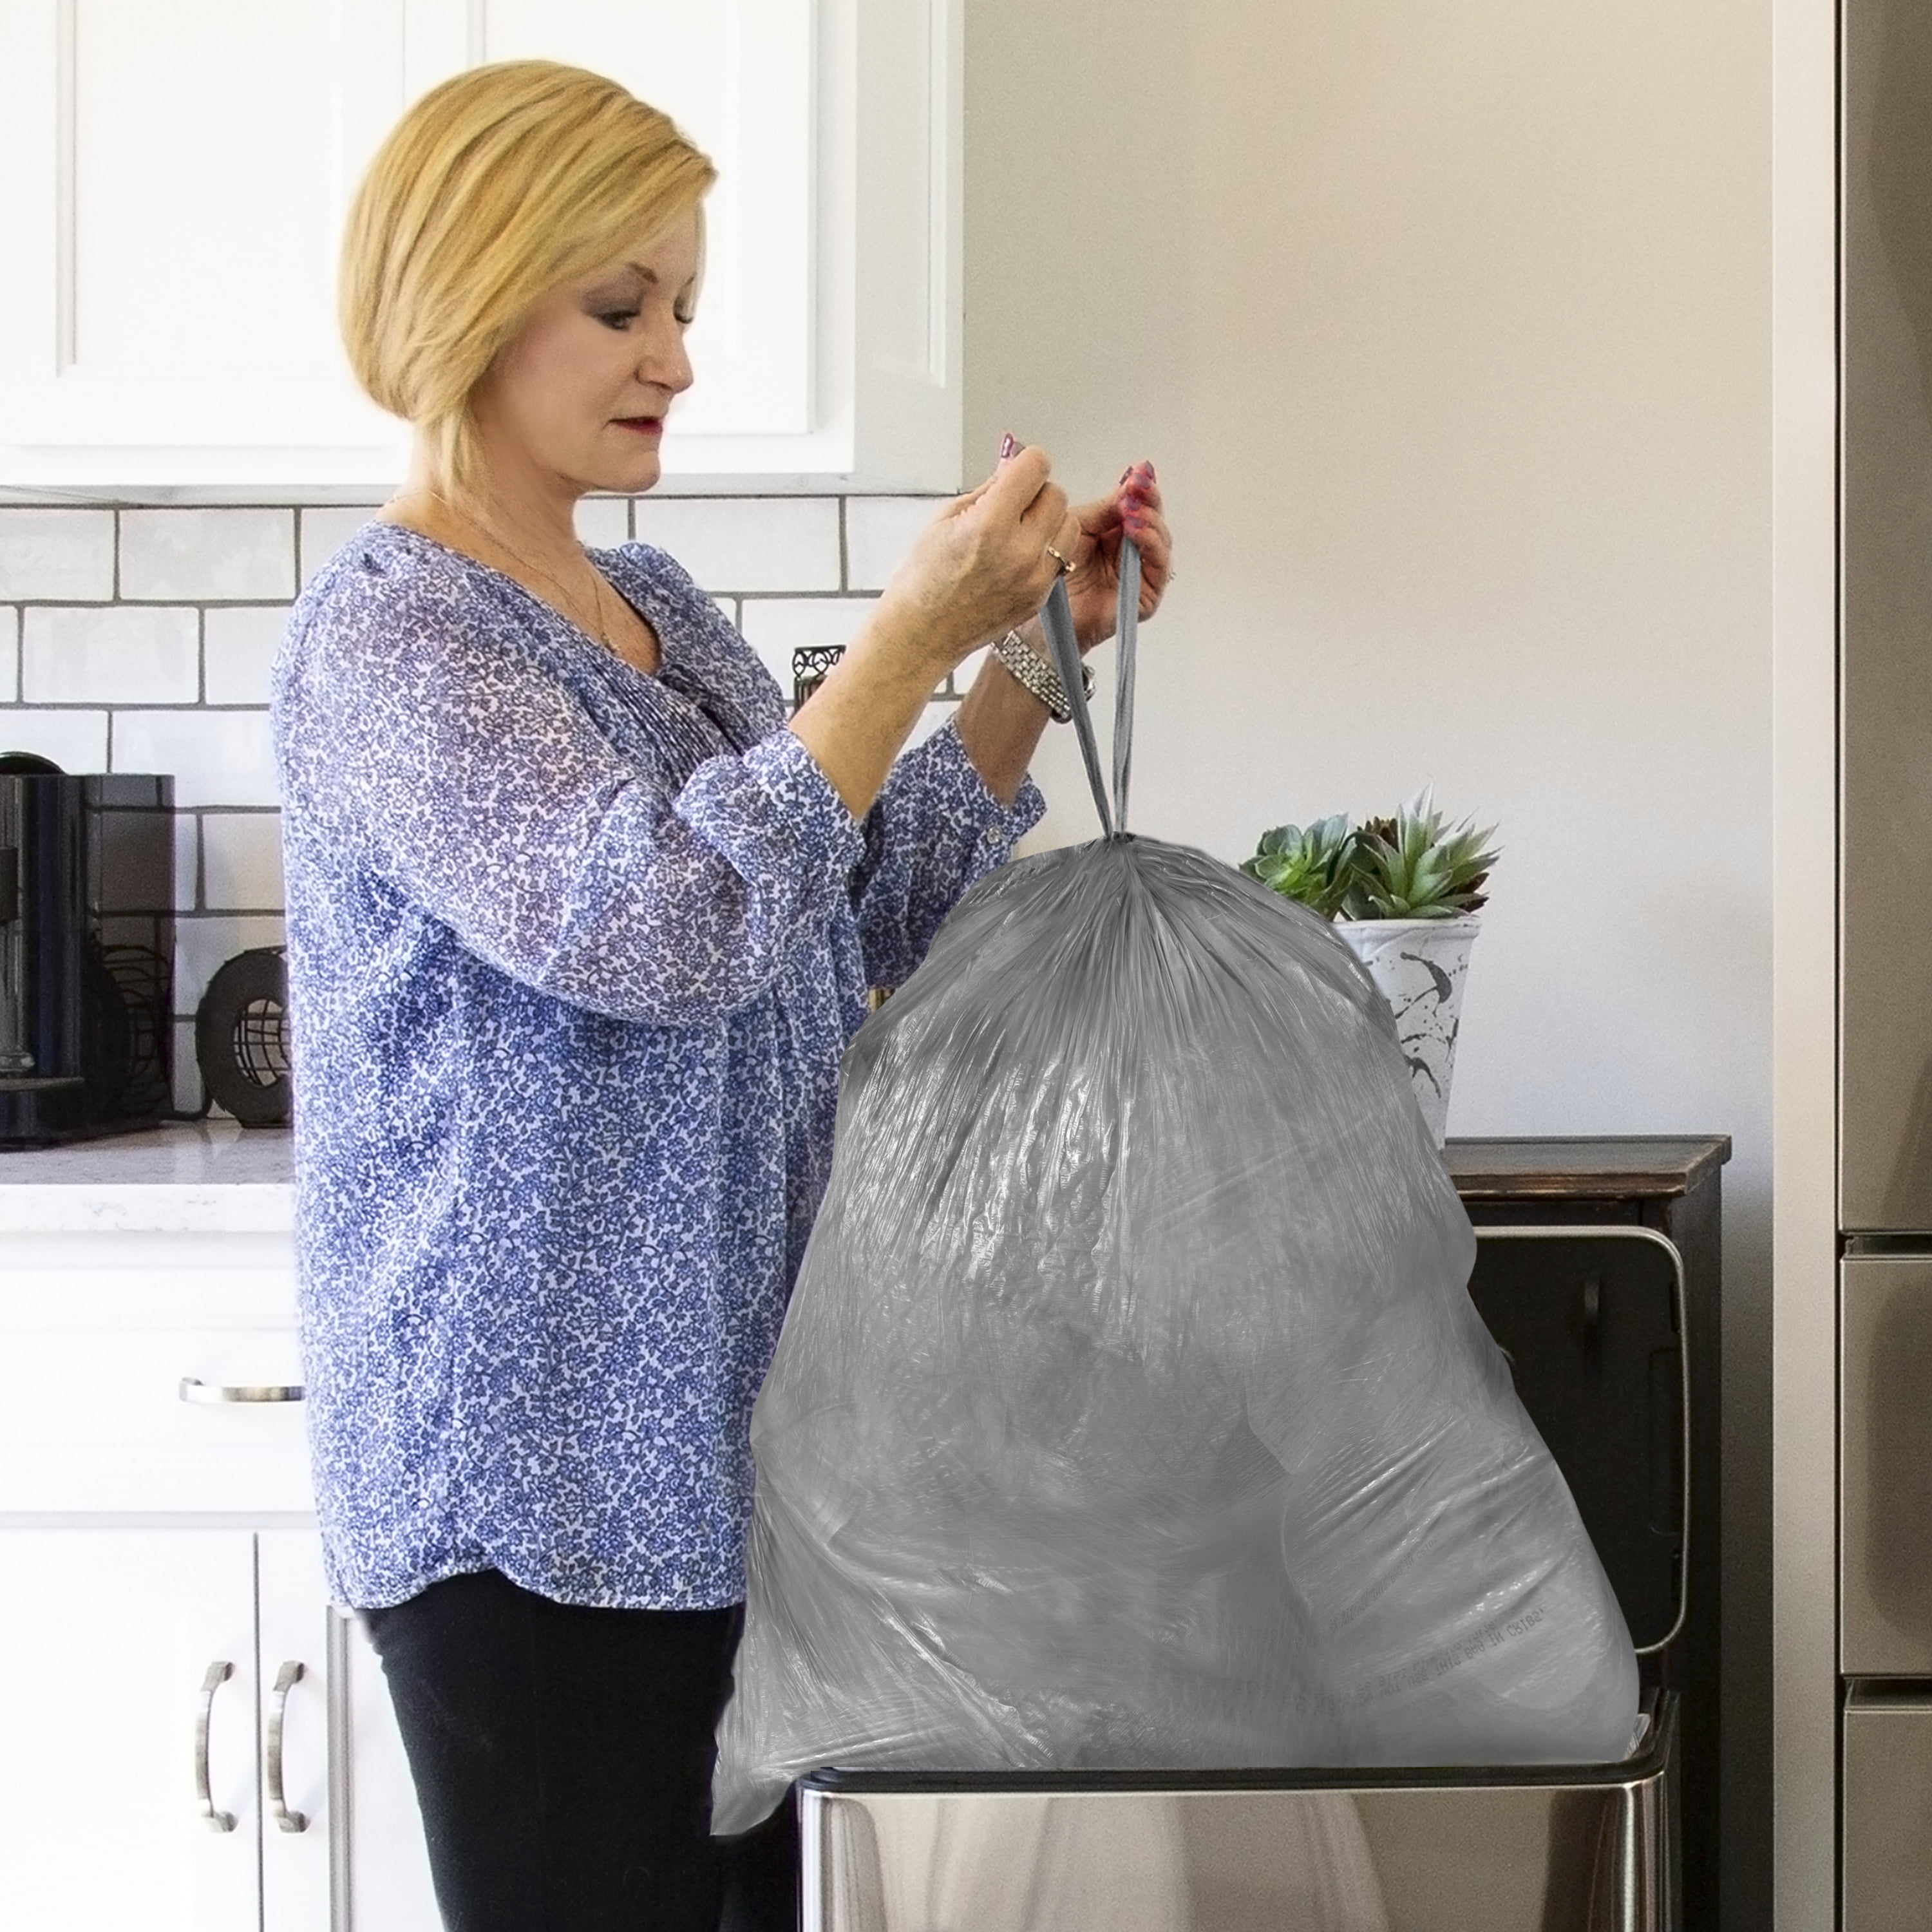 Color Scents Medium Trash Bags, 8 Gallon, 40 Bags (Simply Clean Scent,  Drawstring)